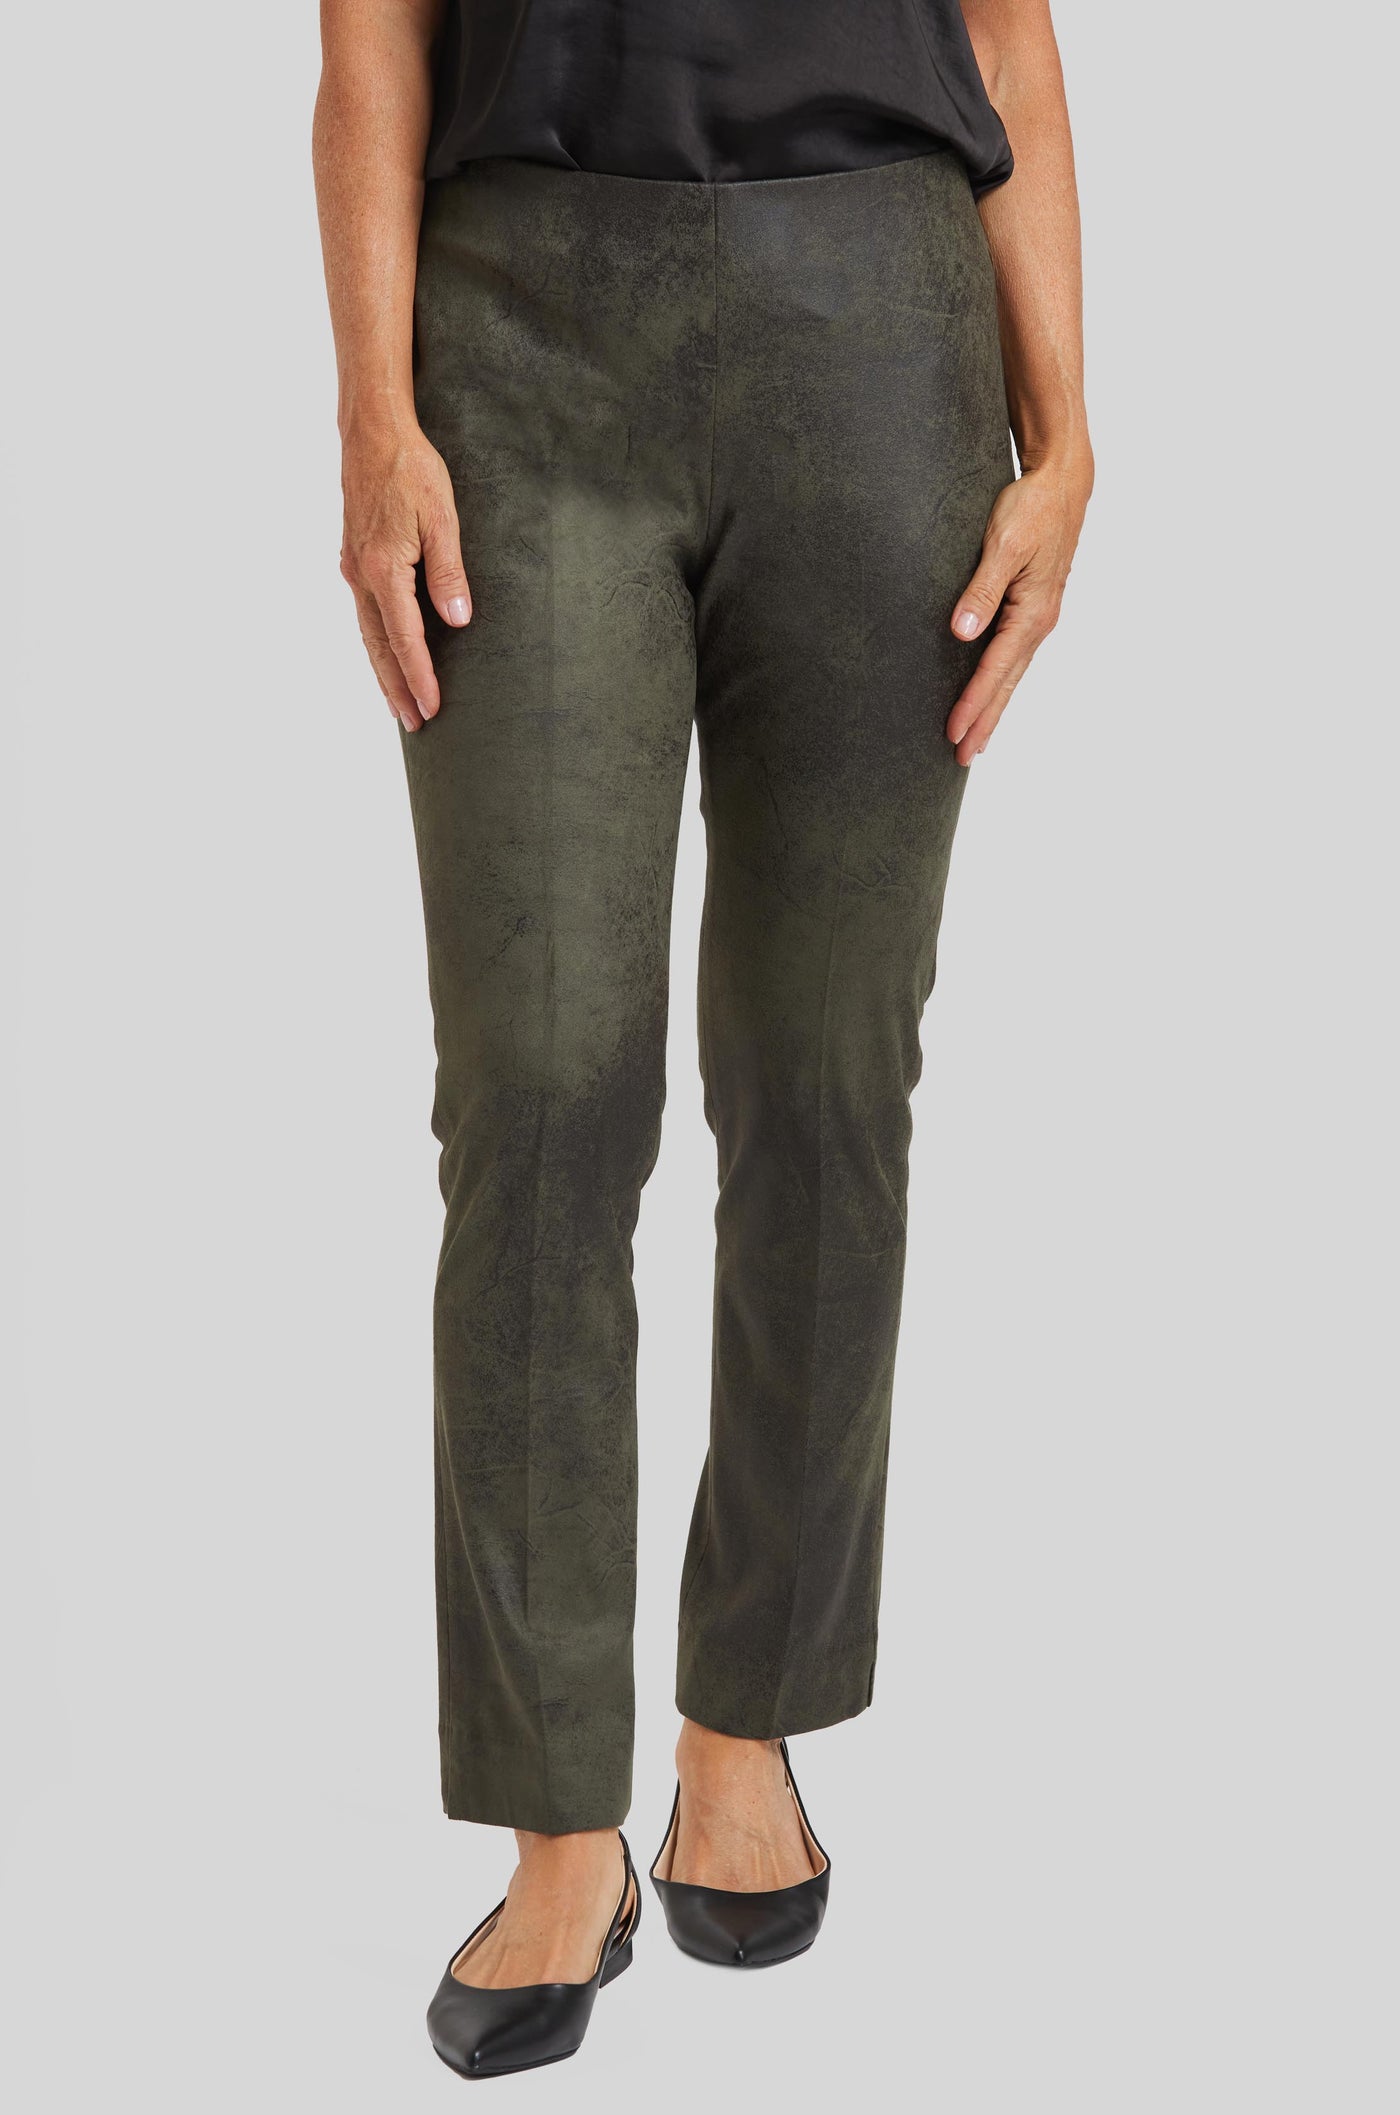 Distressed Faux Leather Annie Pull On Pant- FINAL SALE